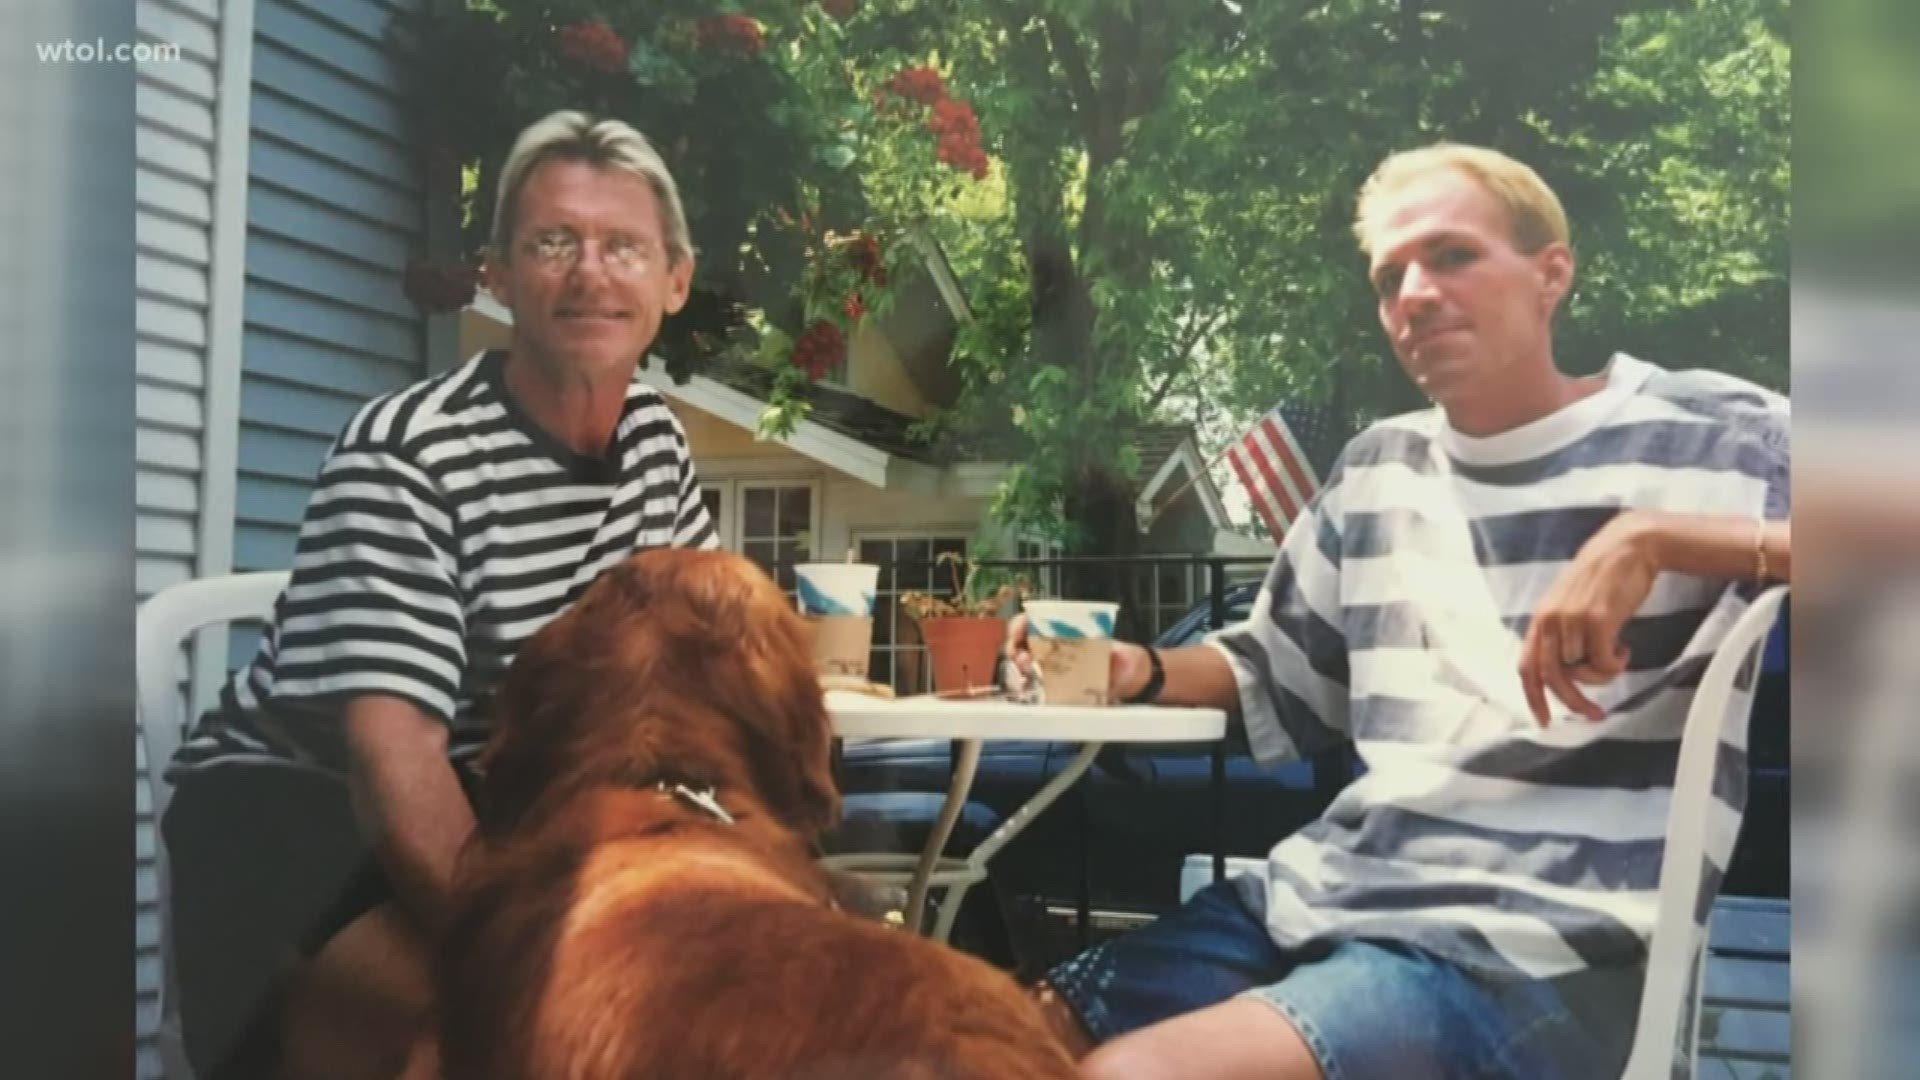 Jym Shipman and Don Weiler were together for two decades before being able to legally get married.